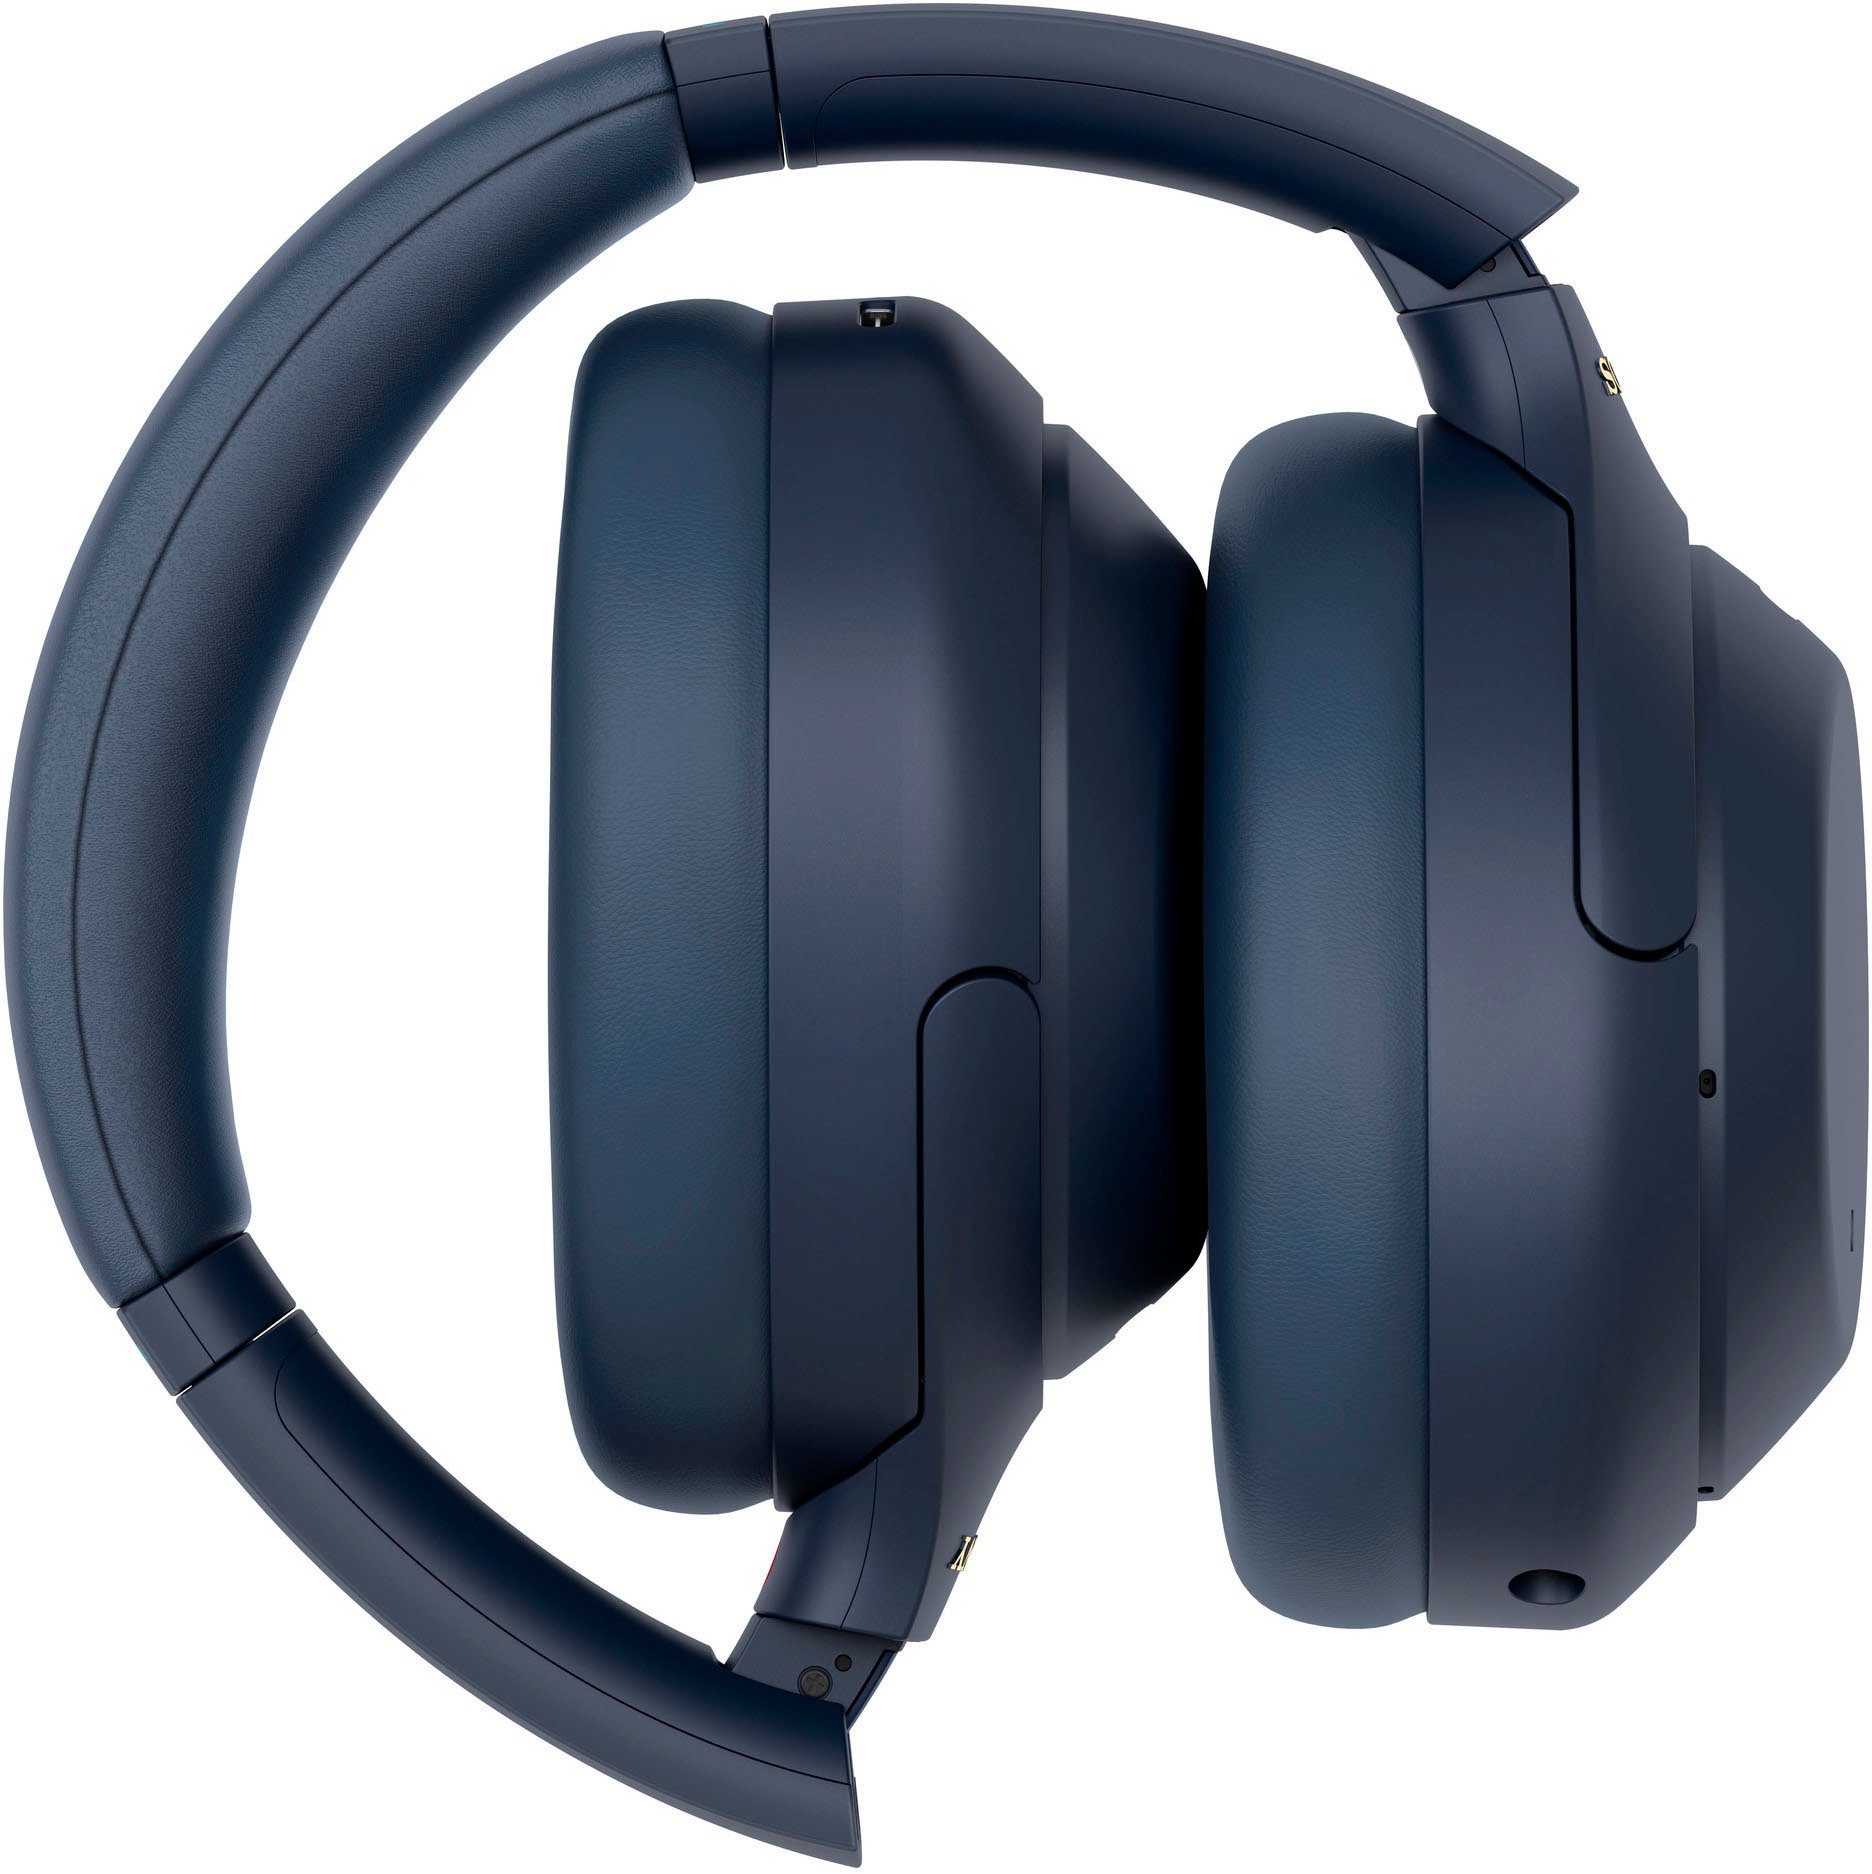 WH-1000XM4 Sony One-Touch (Noise-Cancelling, Bluetooth, blau kabelloser Over-Ear-Kopfhörer NFC, Verbindung Touch NFC, via Schnellladefunktion) Sensor,